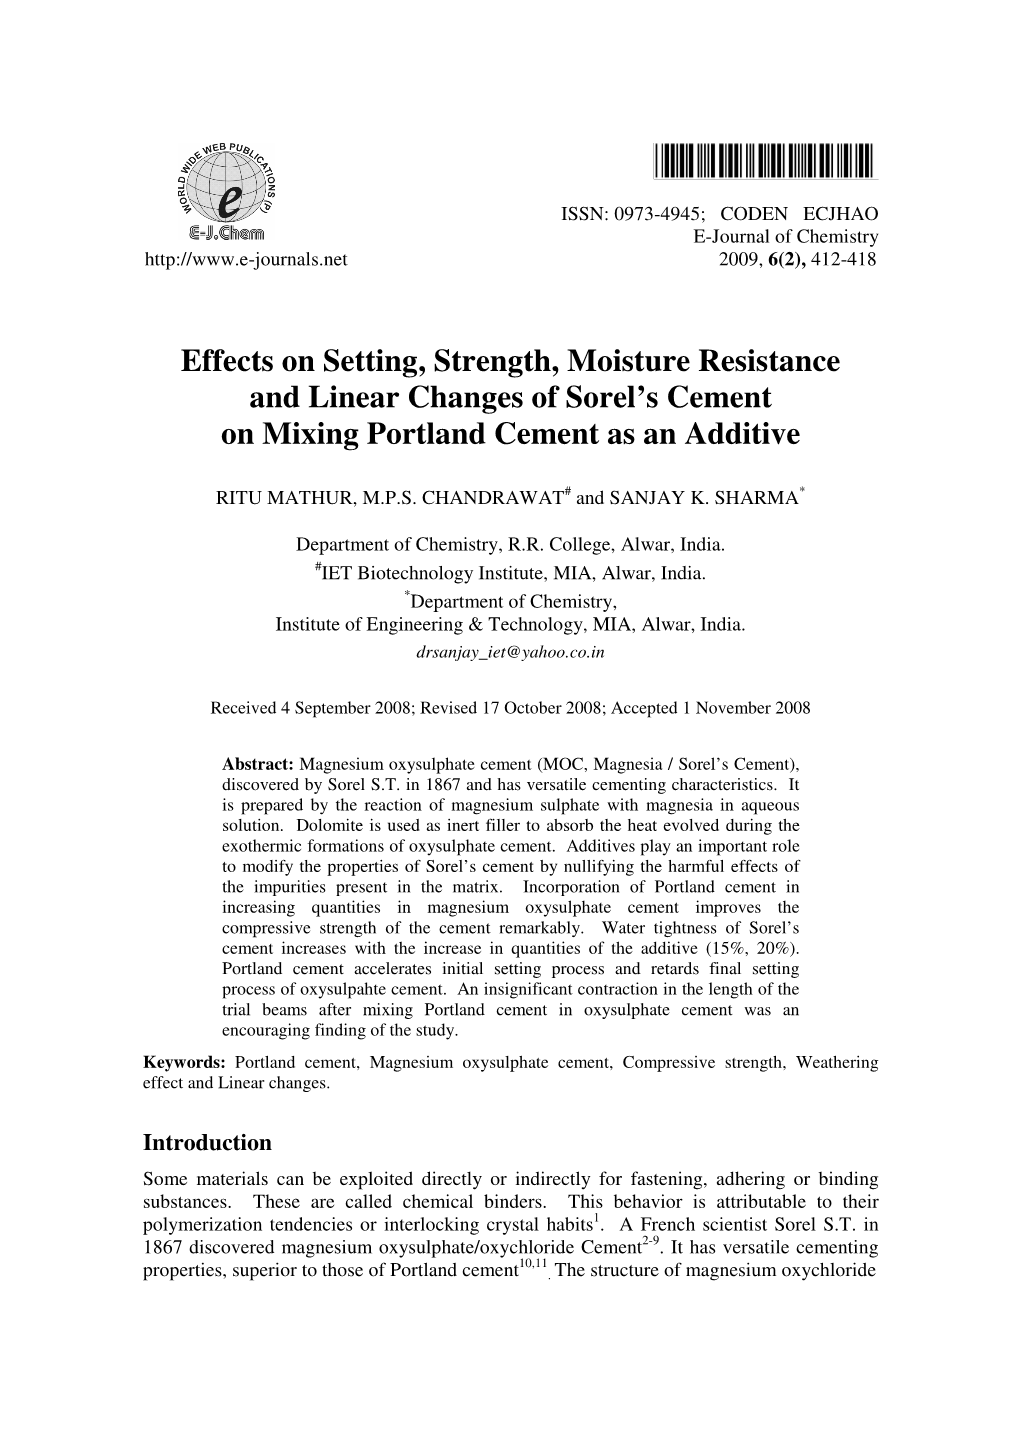 Effects on Setting, Strength, Moisture Resistance and Linear Changes of Sorel’S Cement on Mixing Portland Cement As an Additive